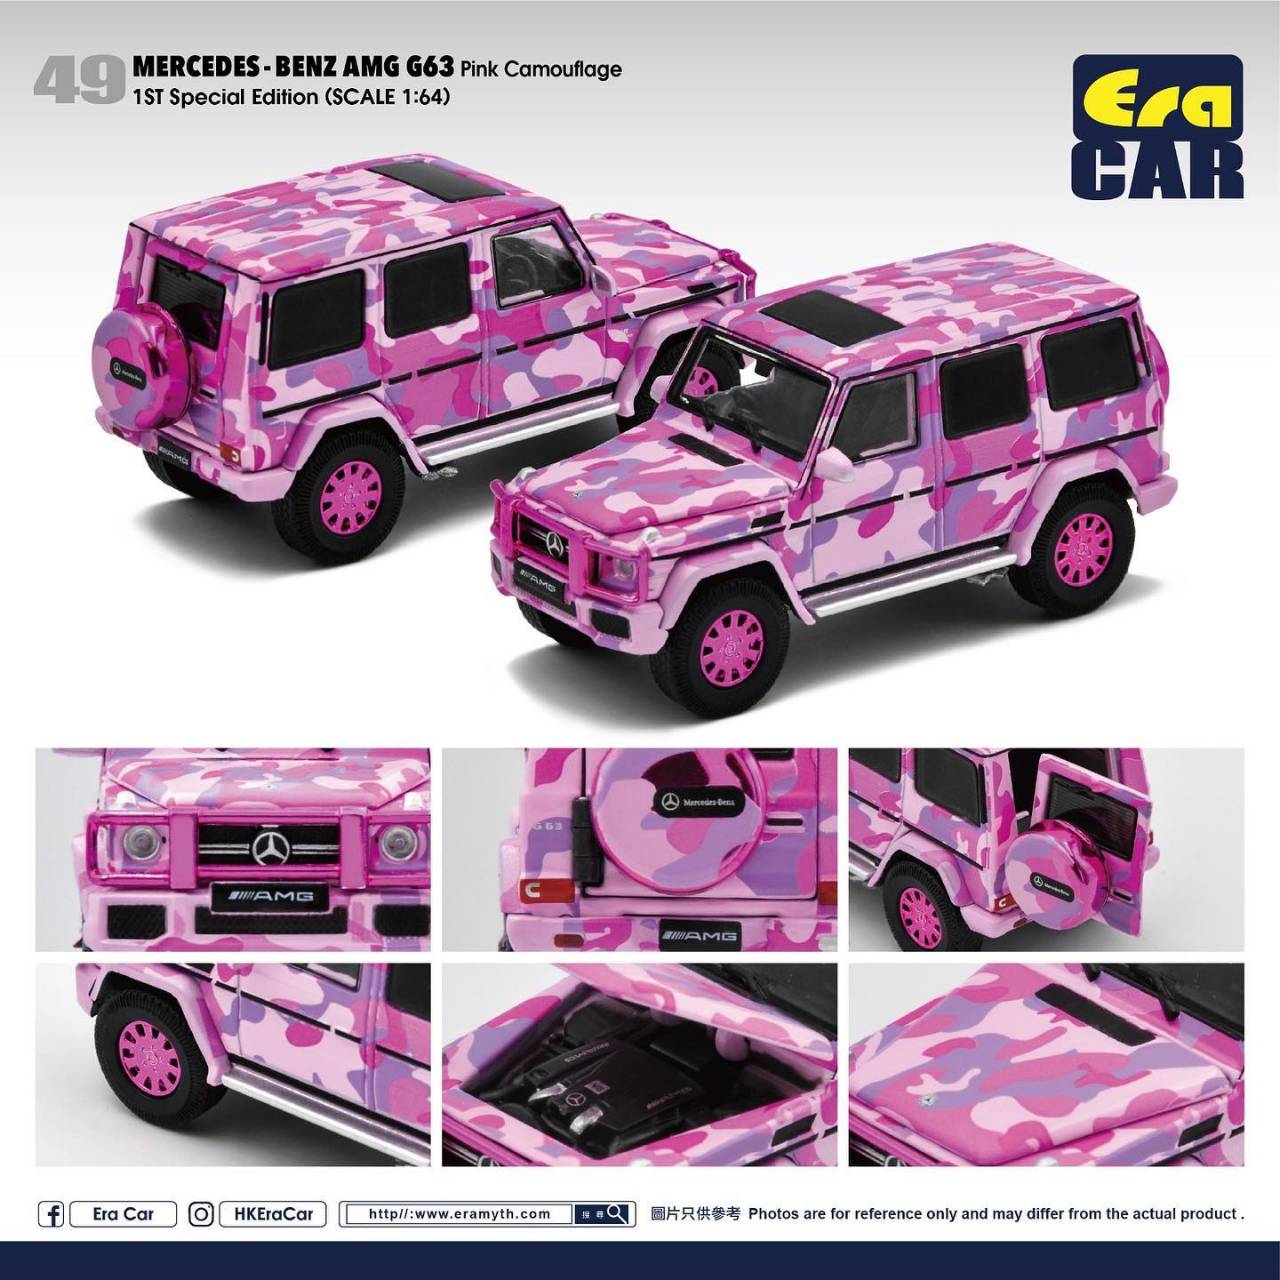 Era Car #49 1st Edition Mercedes-Benz G63 AMG Scale 1:64 Pink Camouflage